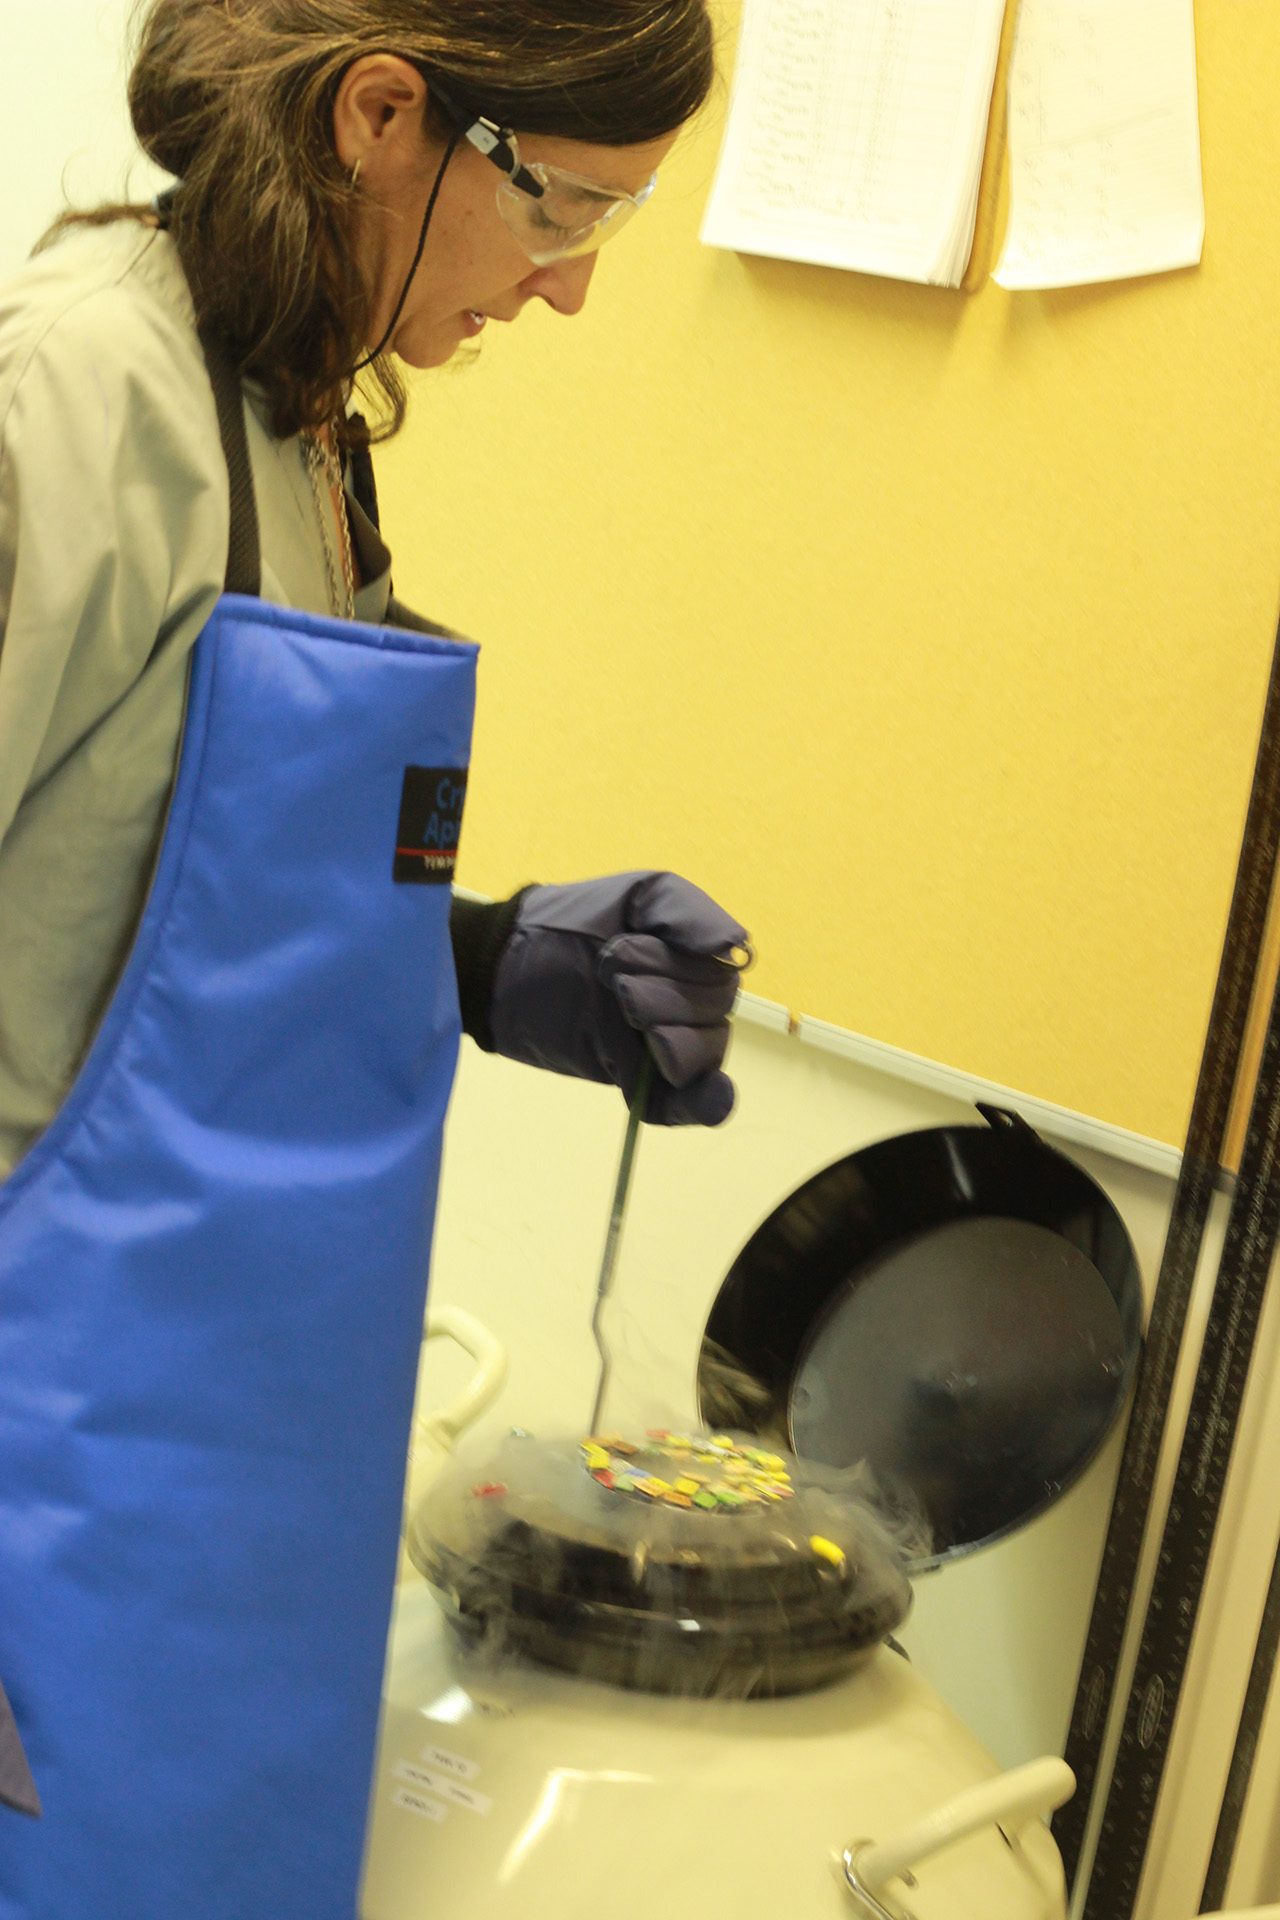 “Patients’ sperm is kept in cryogenic tanks until it’s time to use it.” – Chief andrologist, María Belén Herrero.